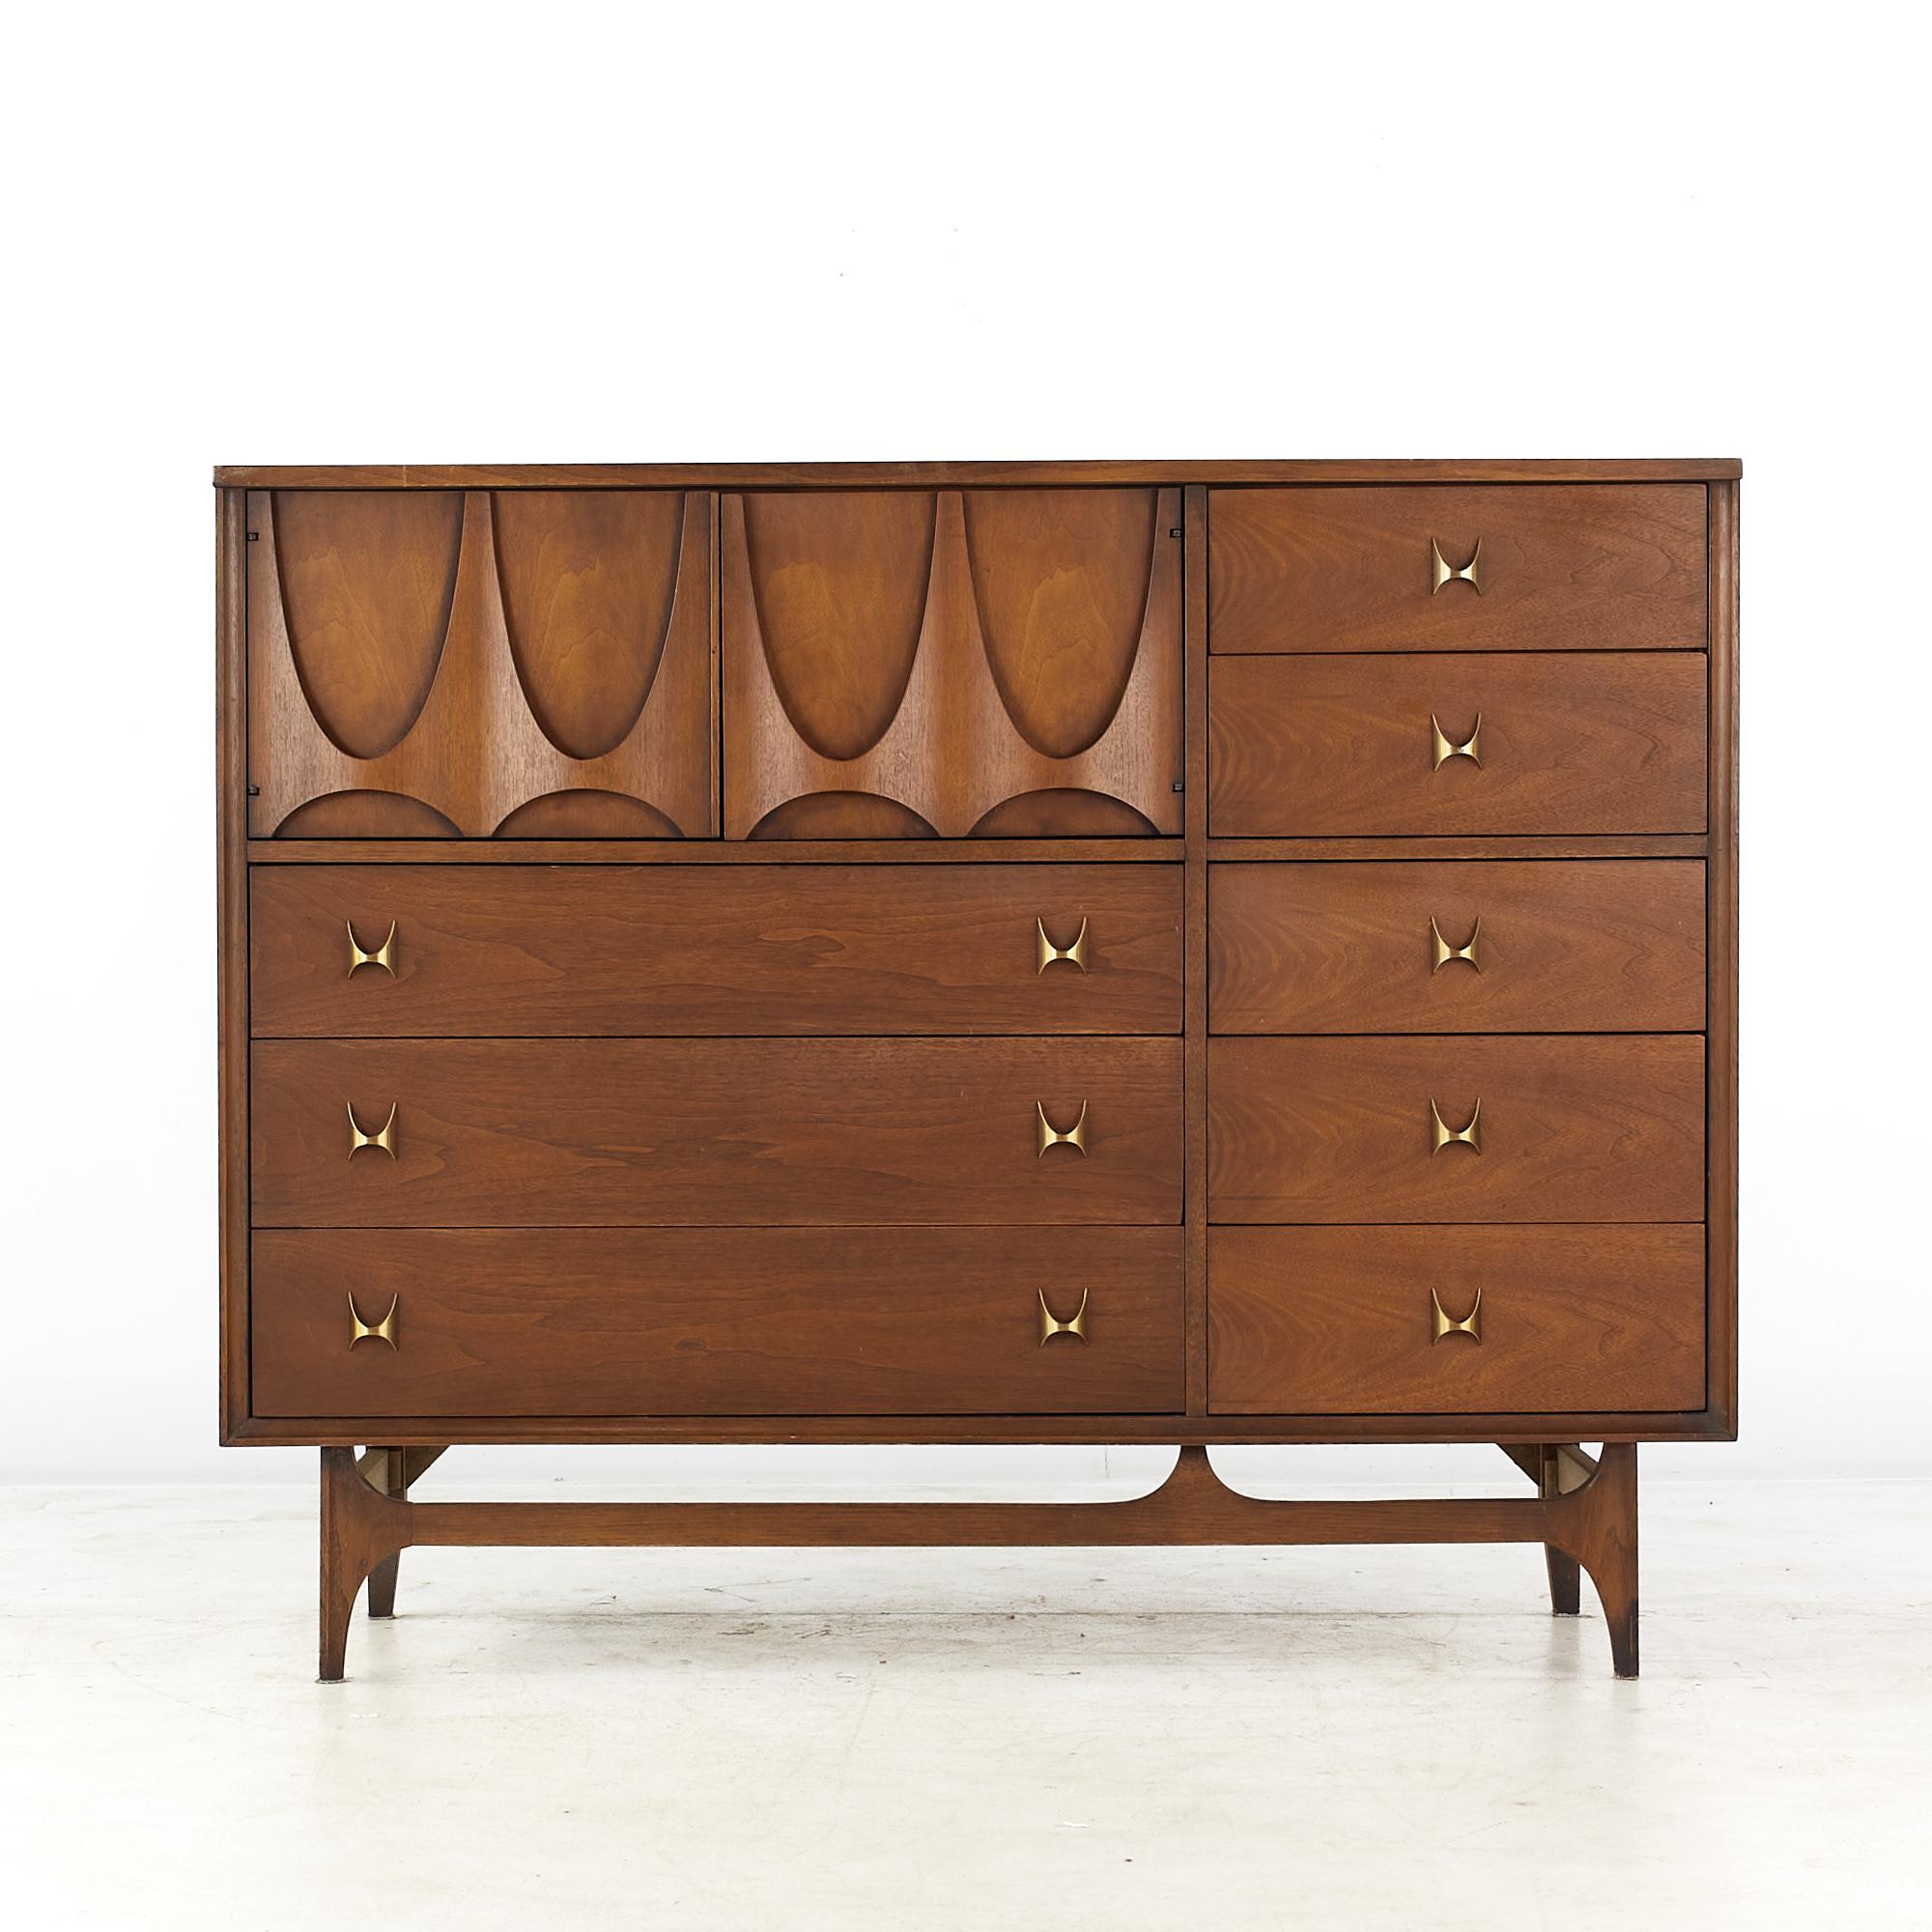 Broyhill Brasilia Brutalist Magna mid-century walnut dresser.

This dresser measures: 54 wide x 19 deep x 43.25 inches high.

All pieces of furniture can be had in what we call restored vintage condition. That means the piece is restored upon